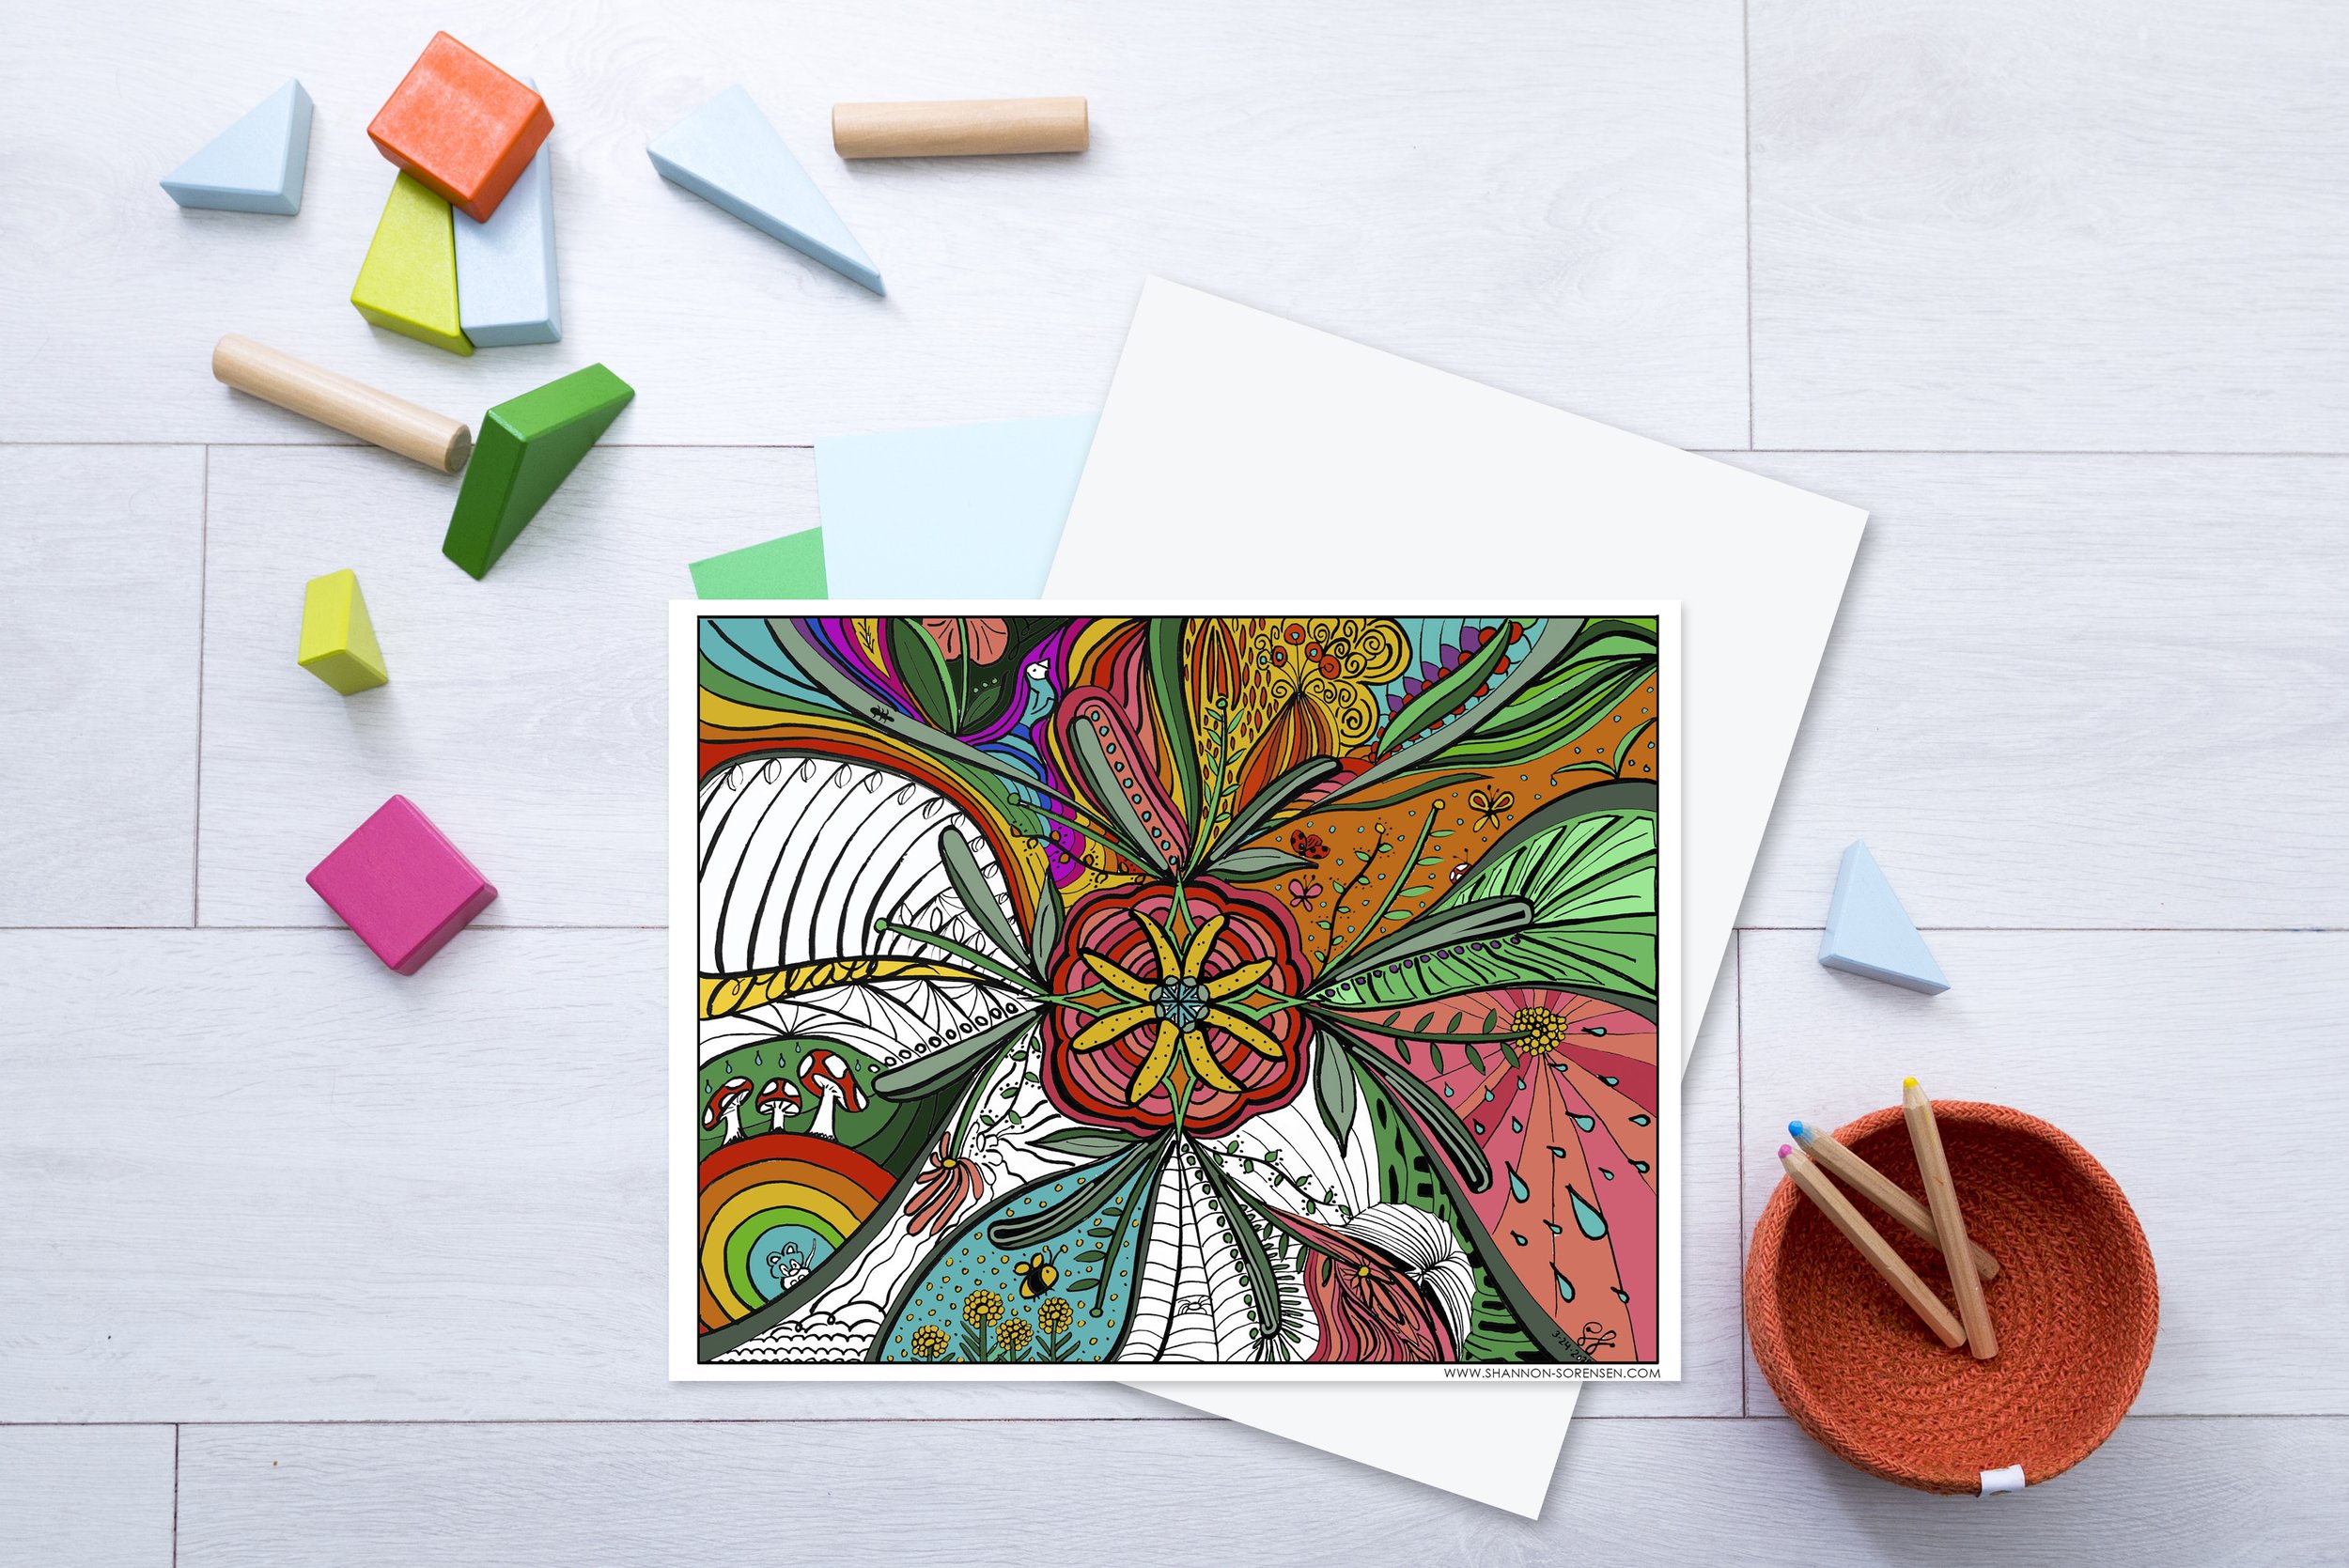 Free Adult Coloring Pages - Creative Designs - Dear Creatives